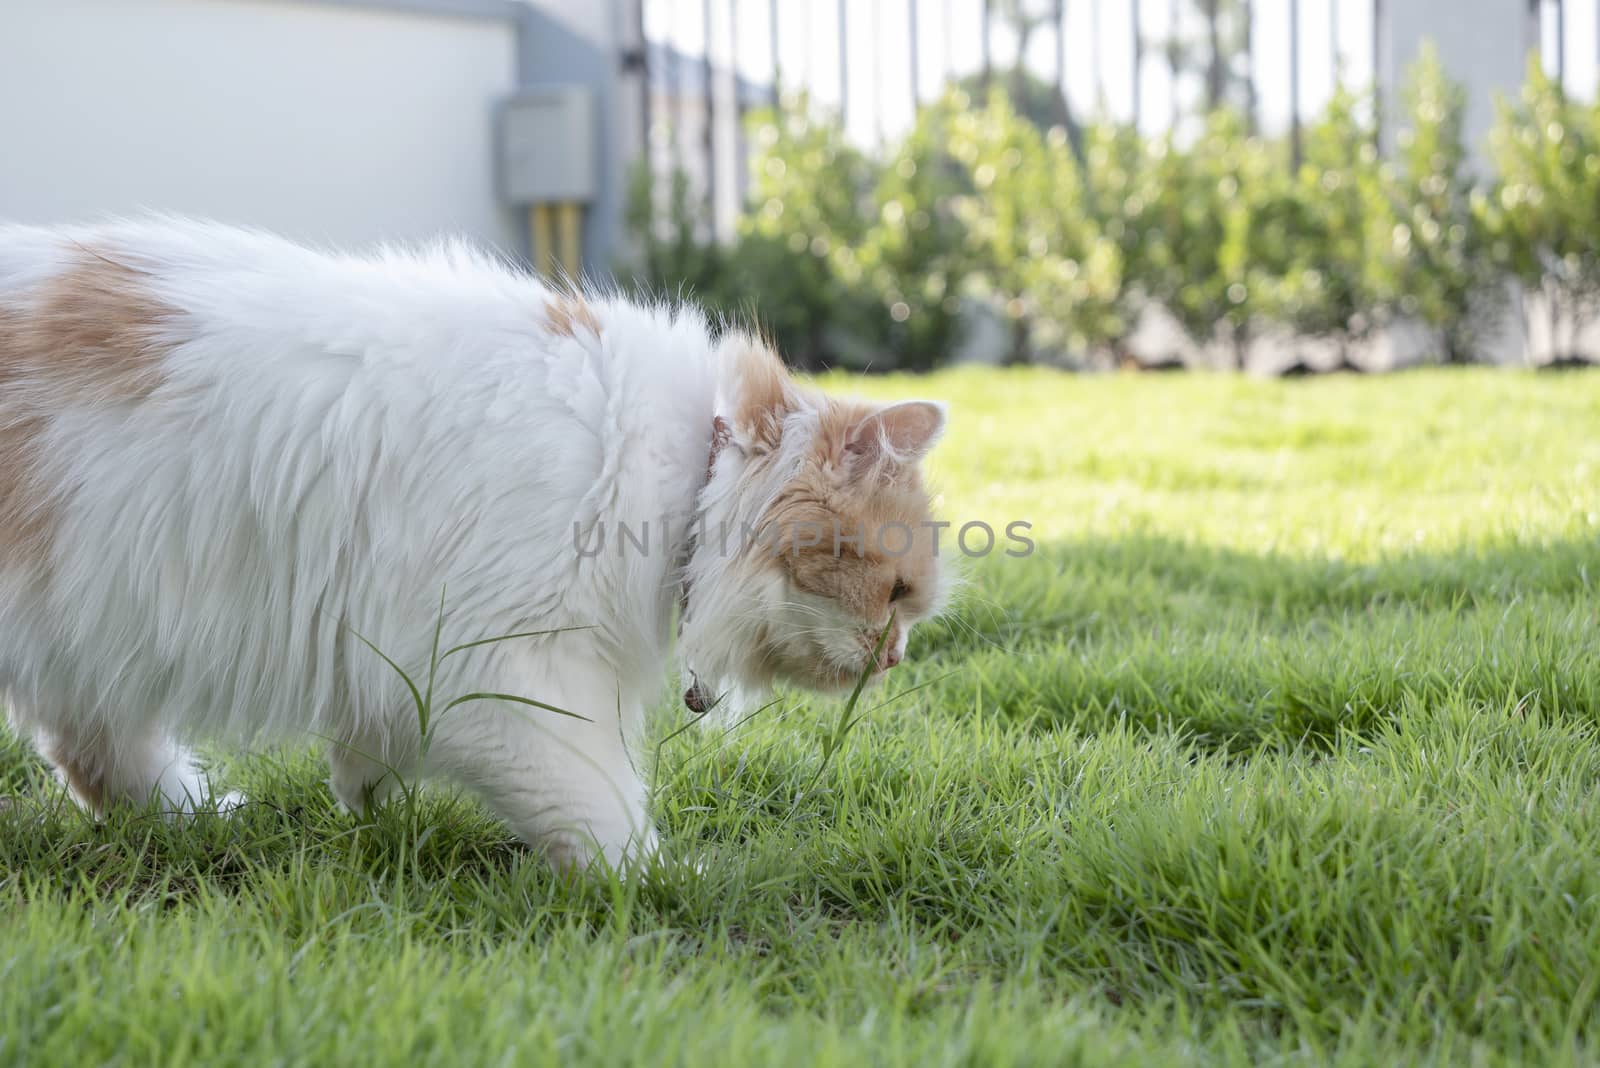 The Persian cat is eating fresh grass on the lawn front. by Nikkikii